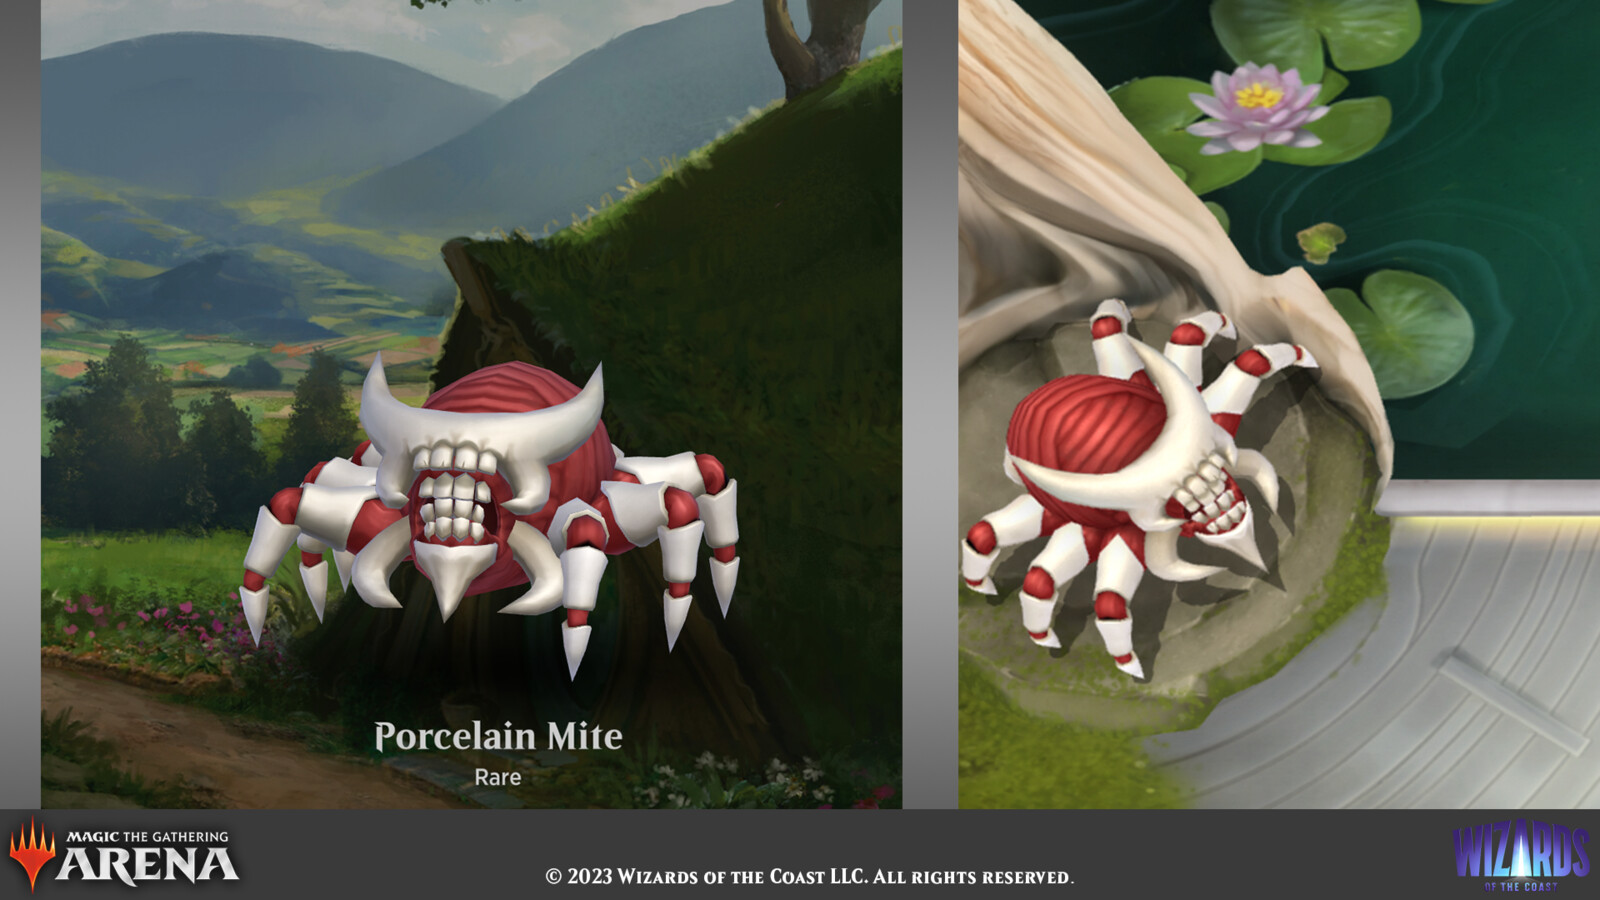 Select pet and game views for the Porcelain Mite